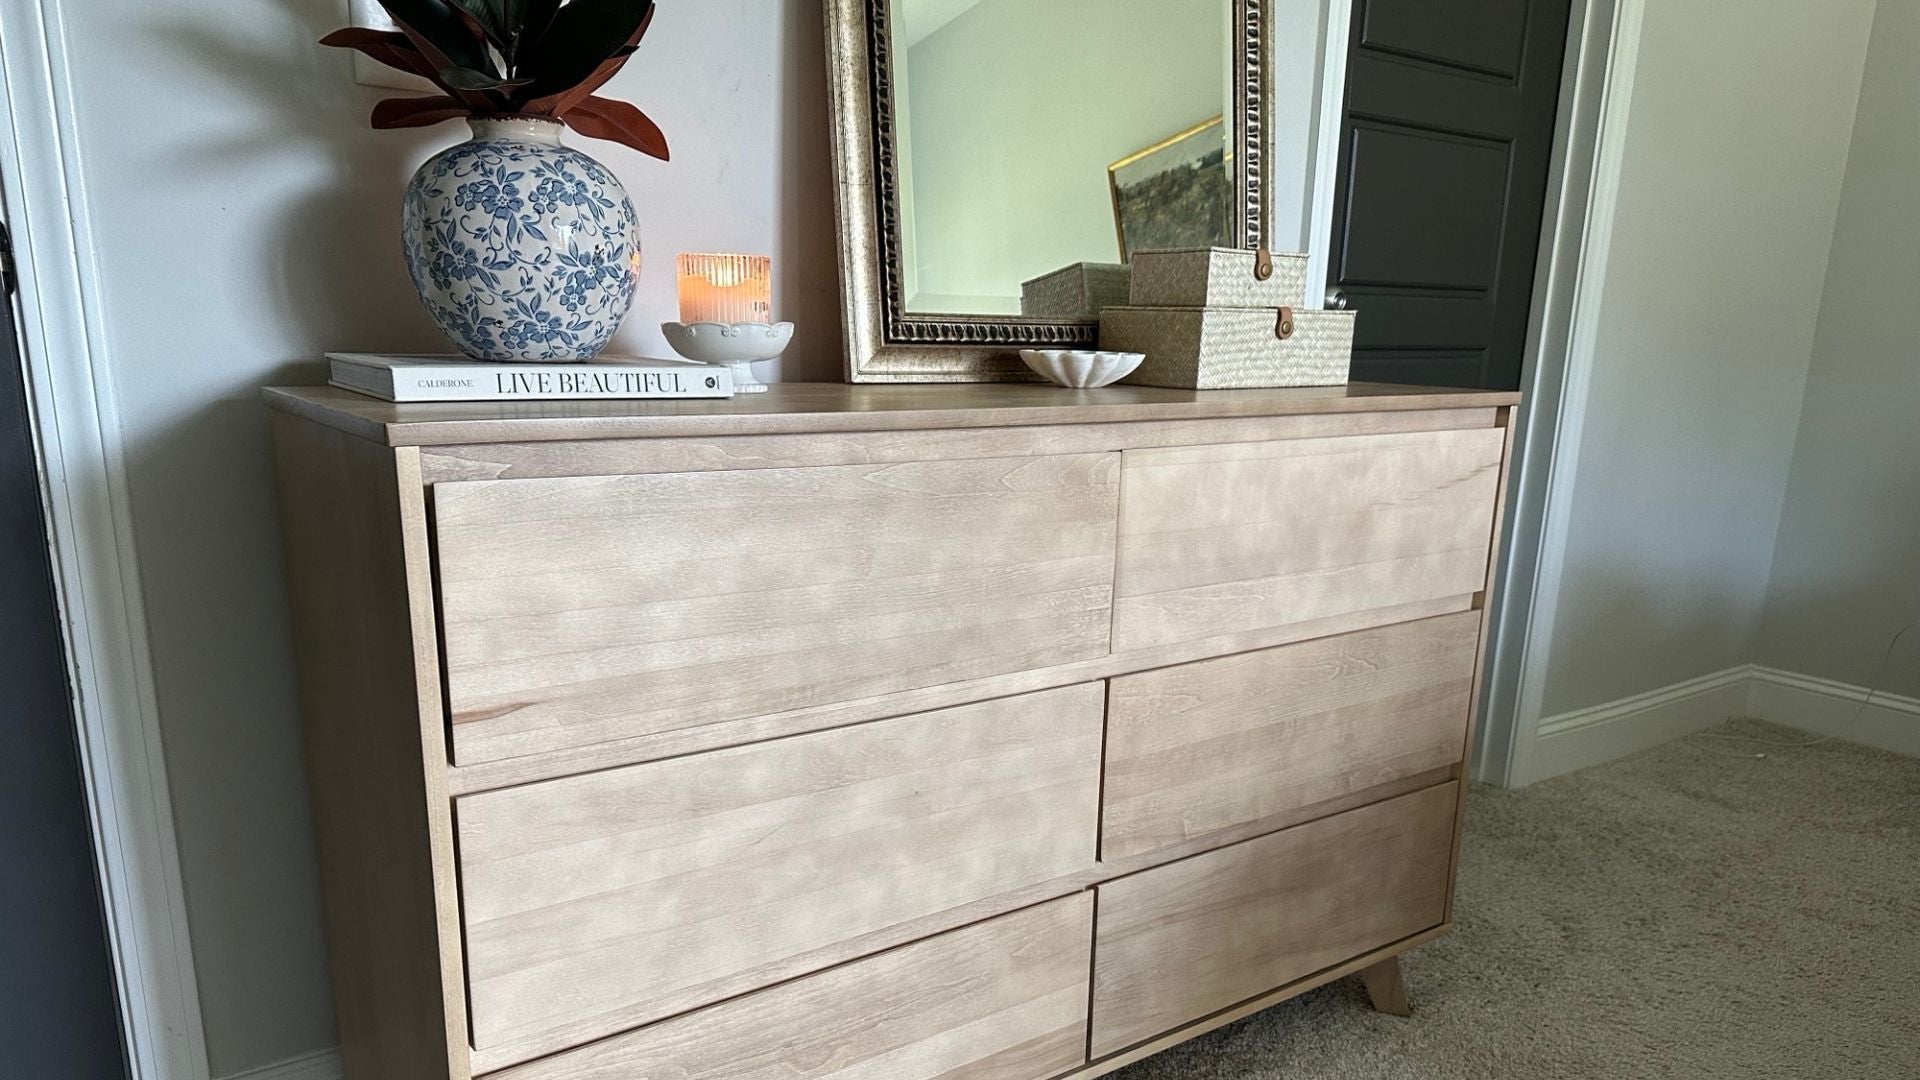 Modern 6-drawer dresser in blonde with mirror, book, vase, and candle